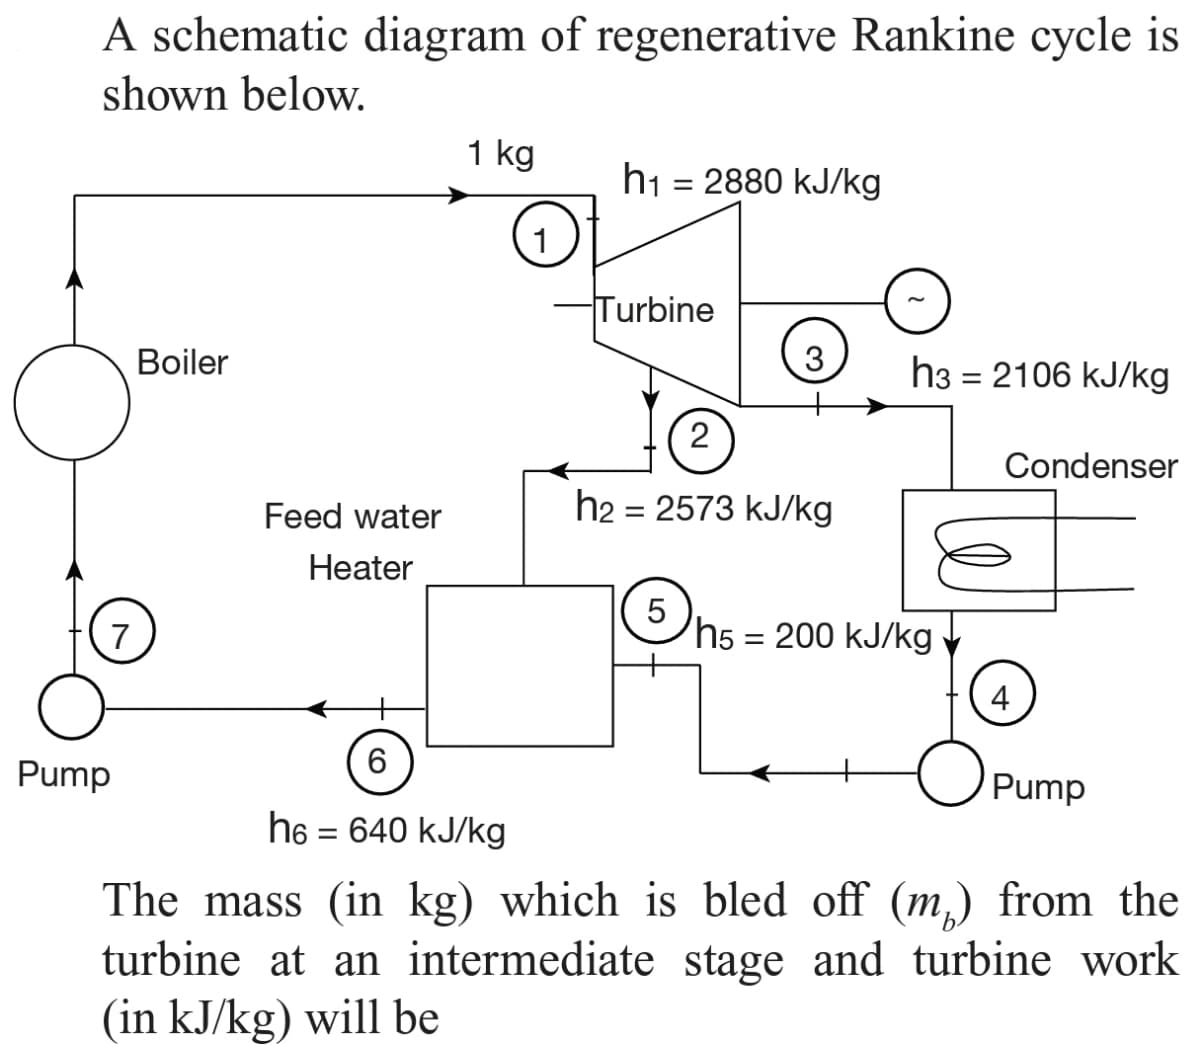 A schematic diagram of regenerative Rankine cycle is
shown below.
1 kg
h1 = 2880 kJ/kg
1
Turbine
Boiler
h3 = 2106 kJ/kg
2
Condenser
Feed water
h2 = 2573 kJ/kg
Heater
'h5 = 200 kJ/kg
4
Pump
Pump
h6 = 640 kJ/kg
%3D
The mass (in kg) which is bled off (m,) from the
turbine at an intermediate stage and turbine work
(in kJ/kg) will be
